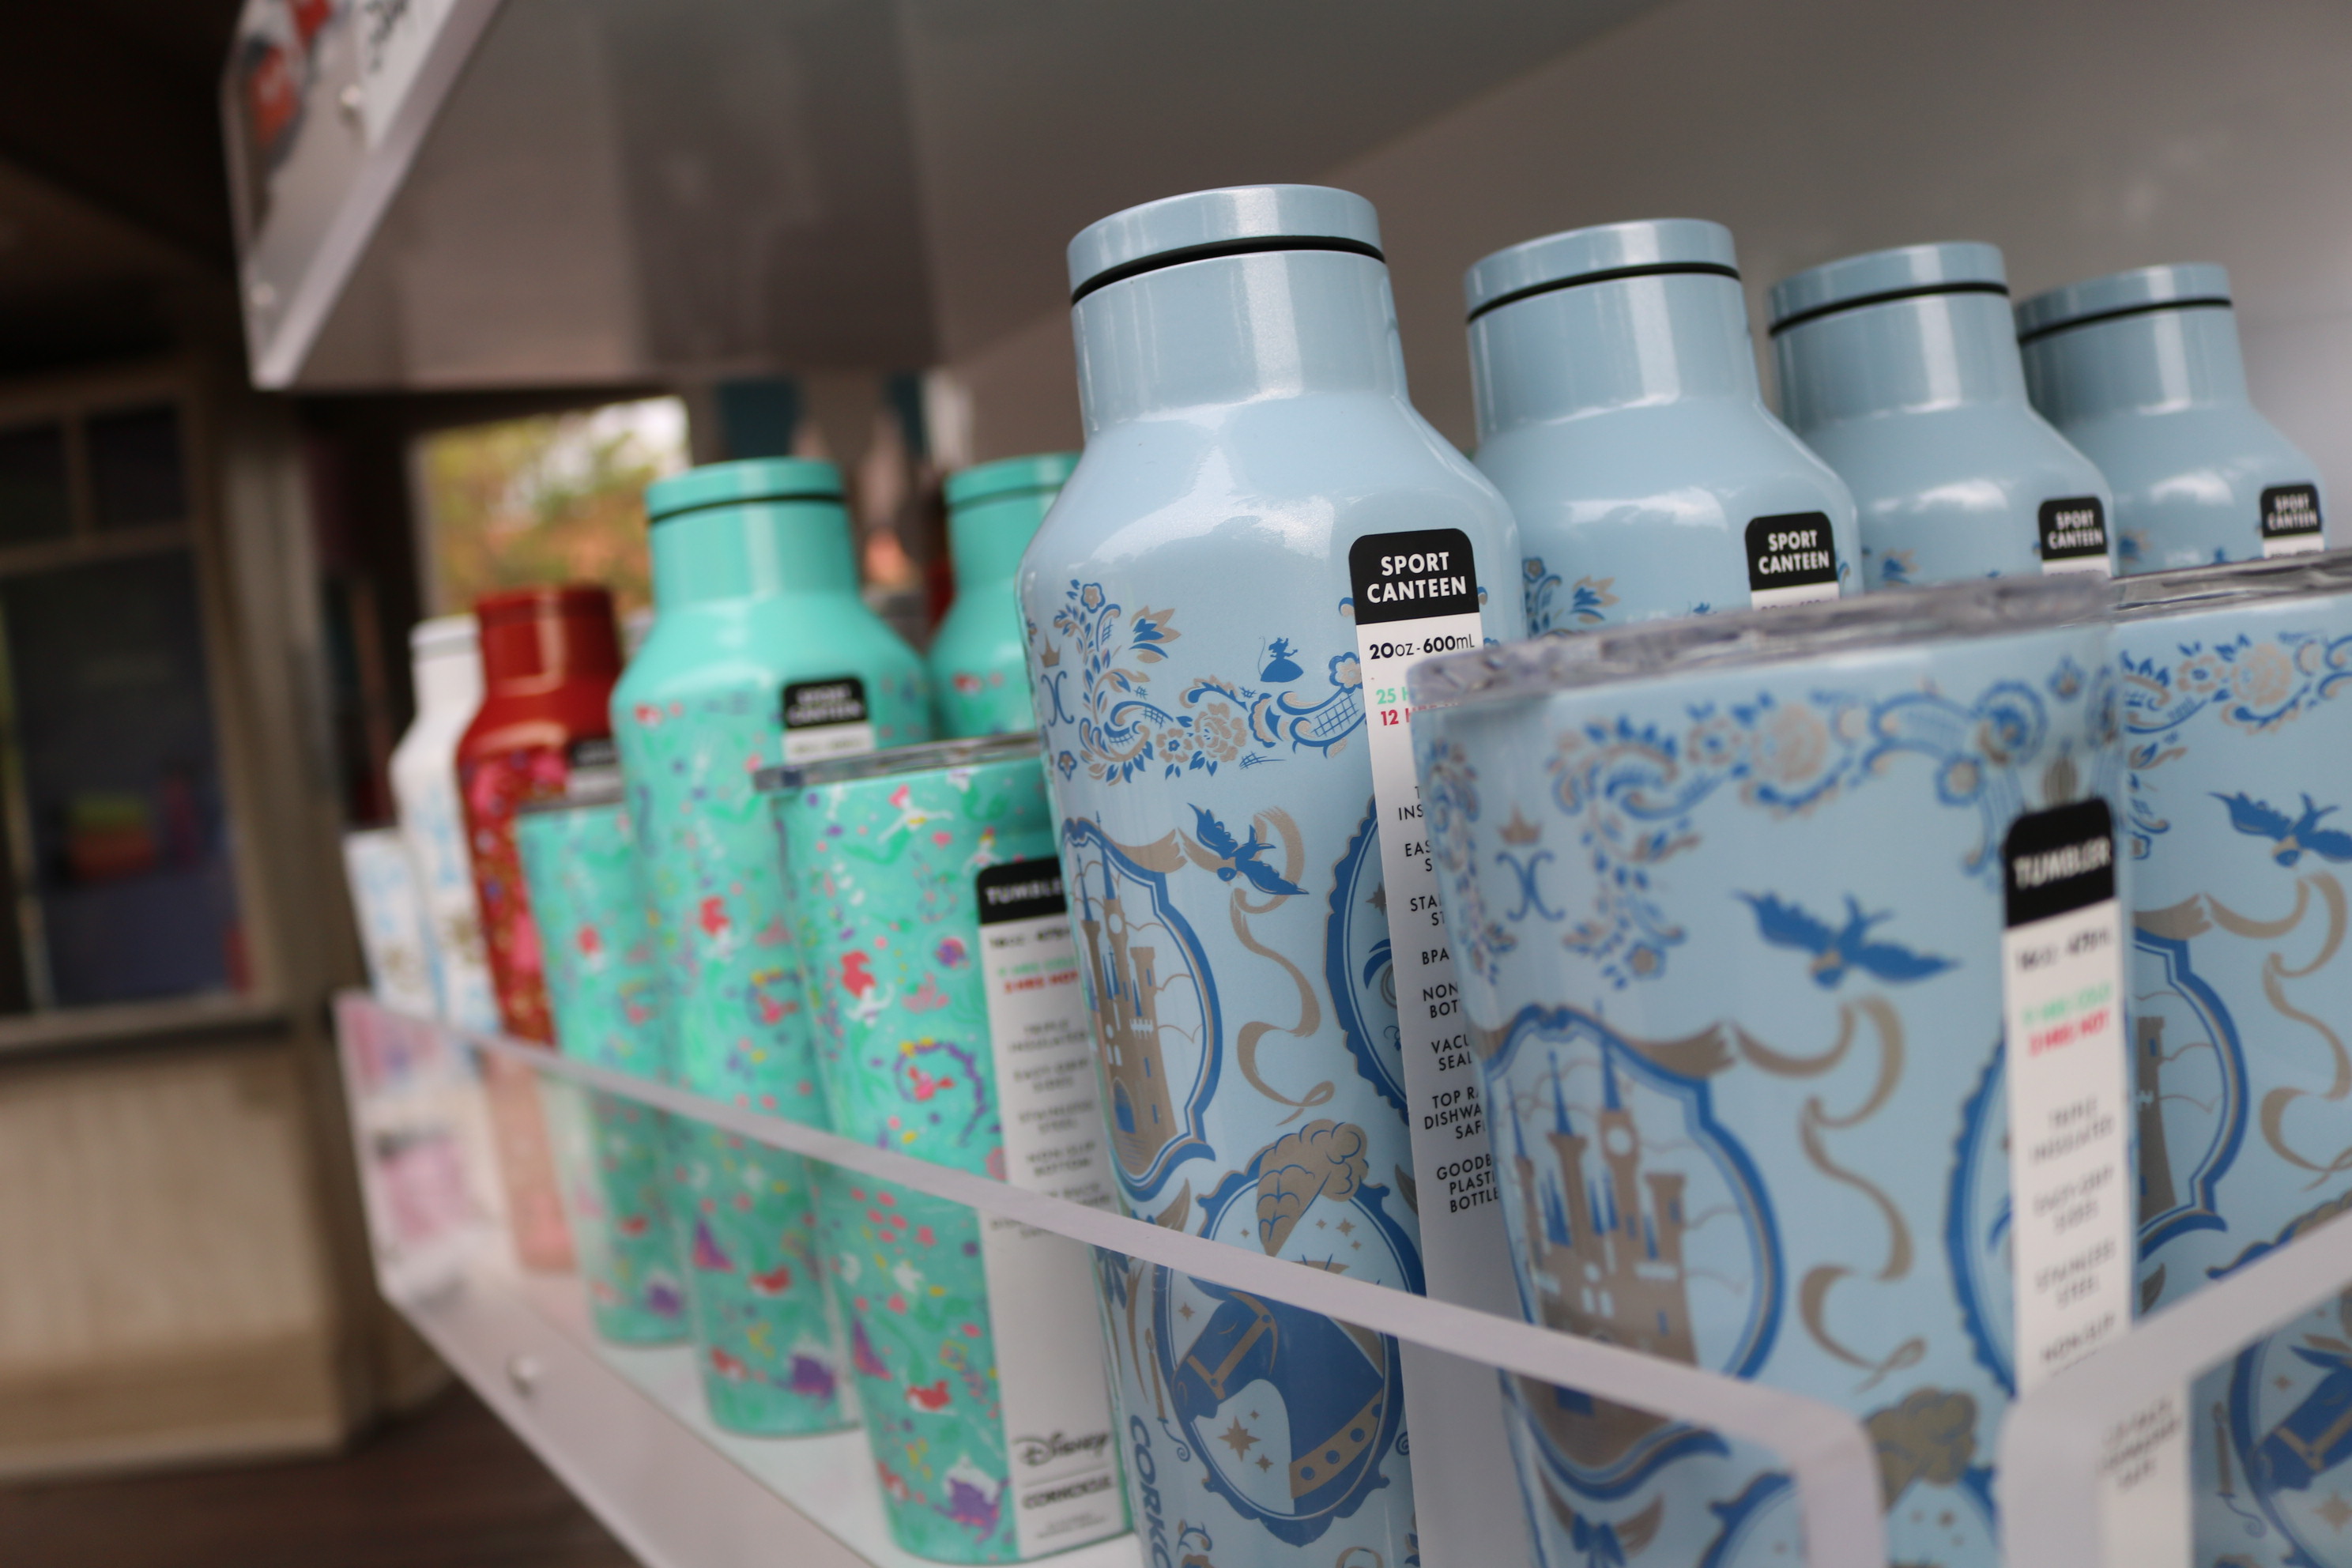 Corkcicle Shop Coming This Spring to Disney Springs - WDW News Today